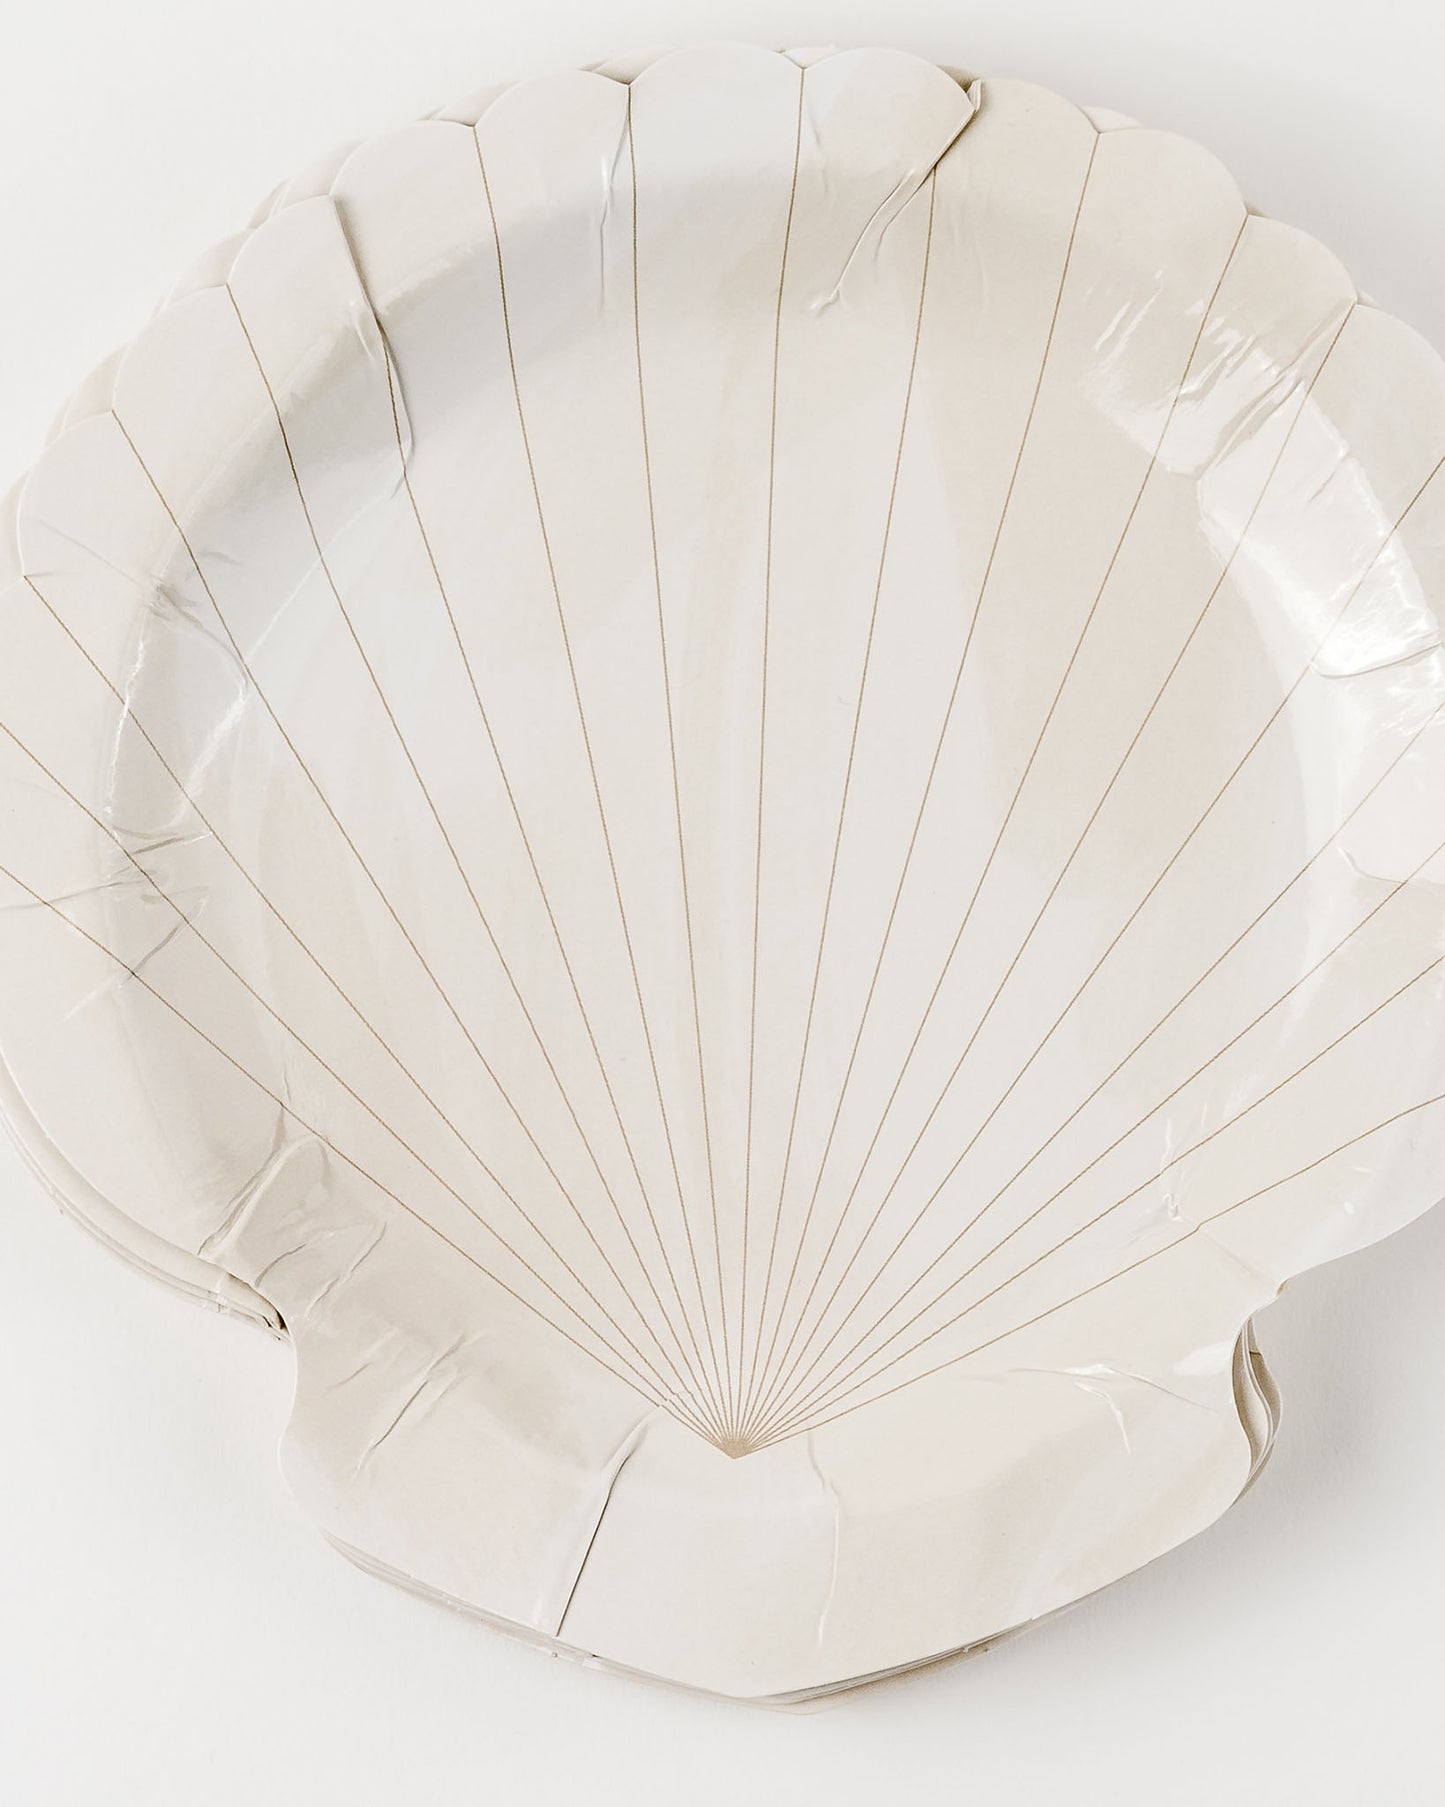 alt="Scallop Shell Cocktail Plates for Baptism Party"